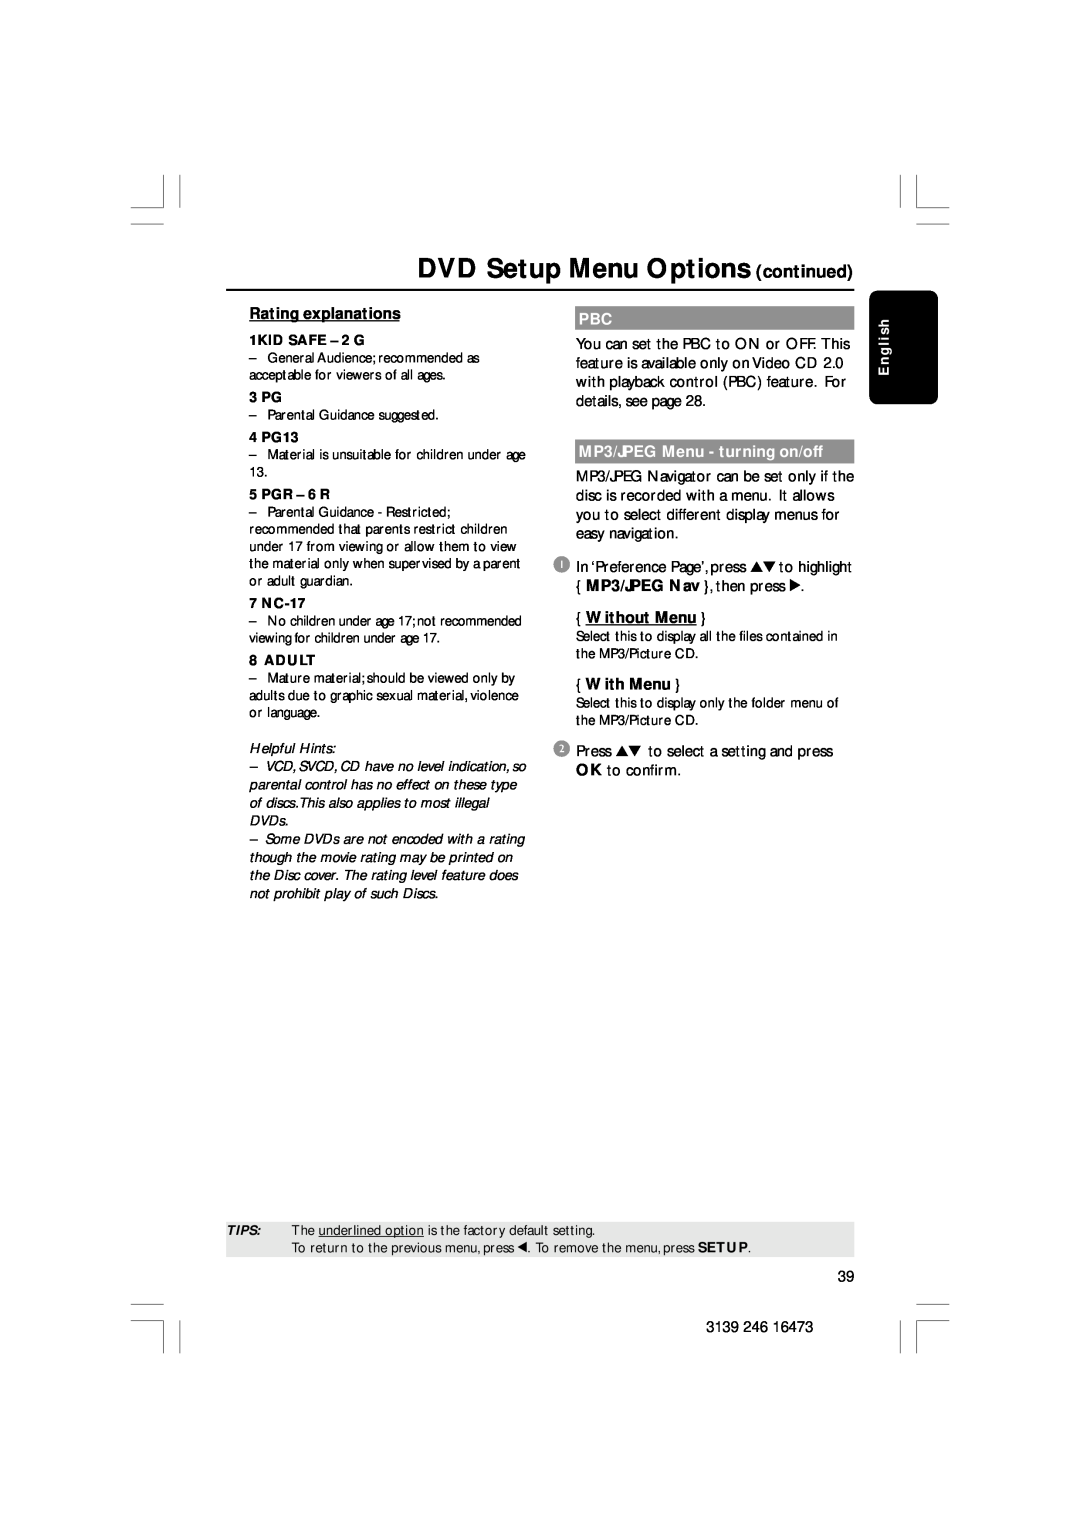 Philips HTS5510C DVD Setup Menu Options continued, Rating explanations, MP3/JPEG Menu - turning on/off, Without Menu 